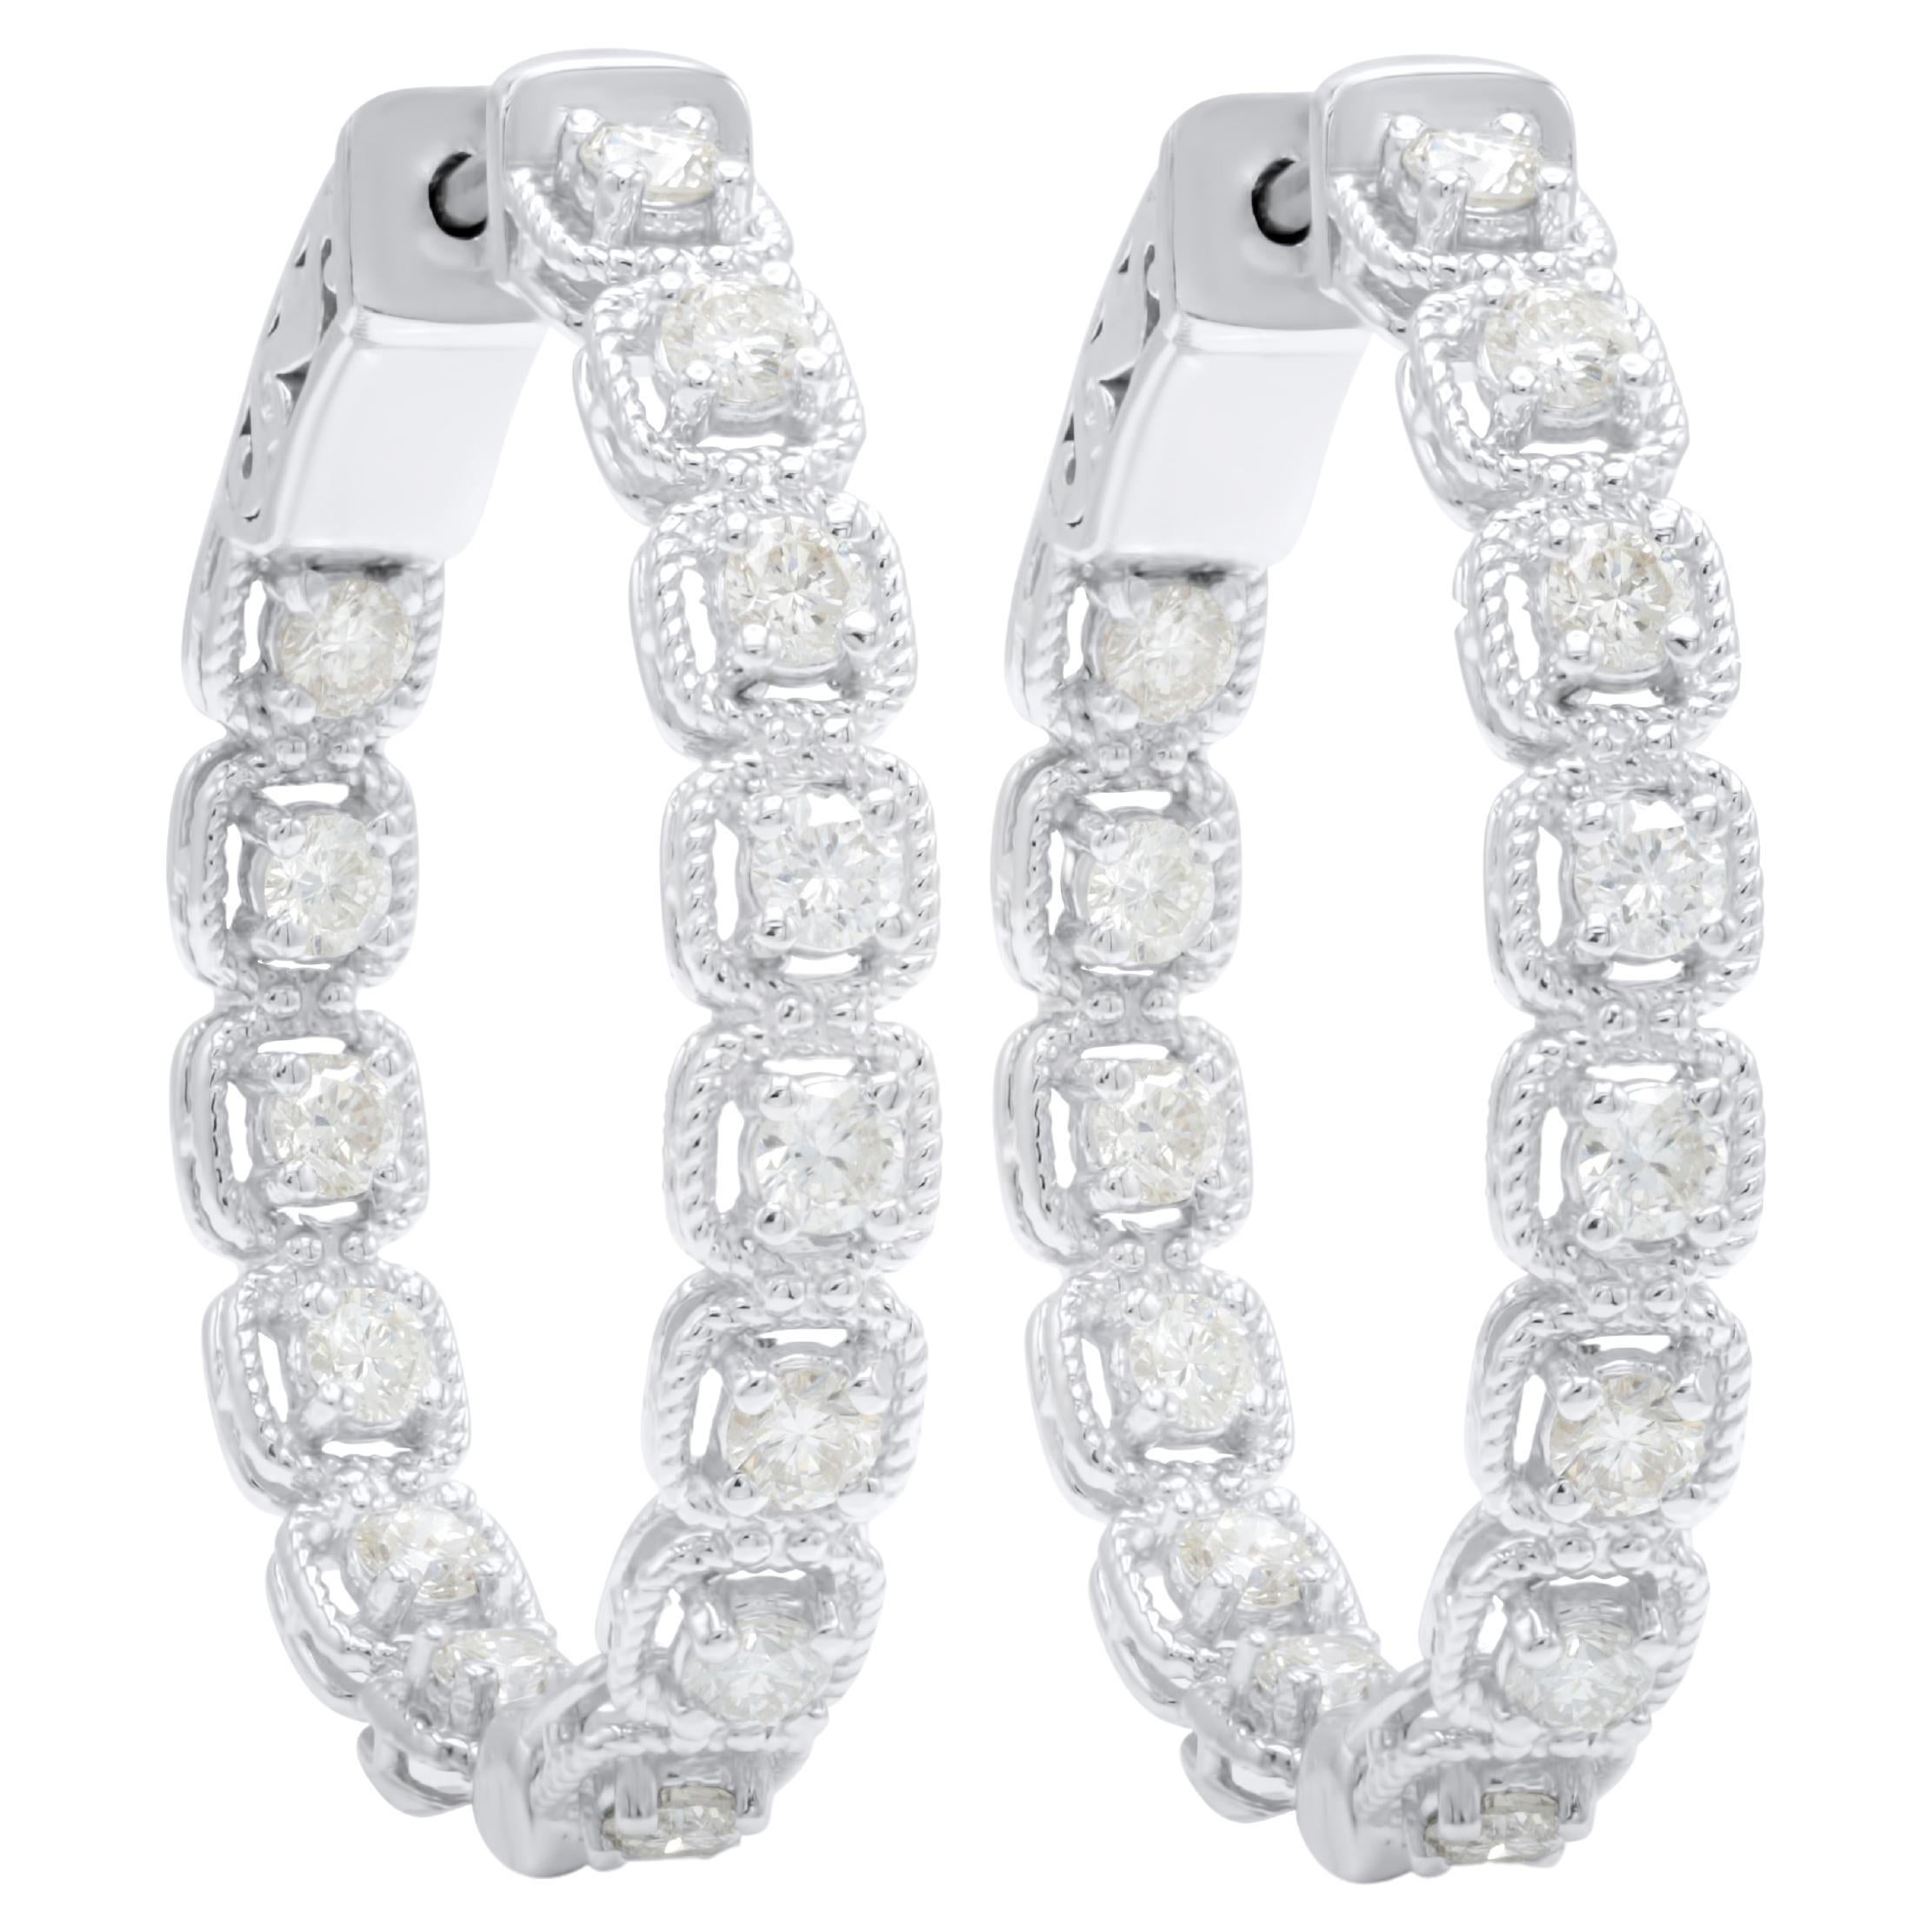 Diana M. 14 kt white gold, 1" earrings featuring 2.00 cts tw diamonds For Sale